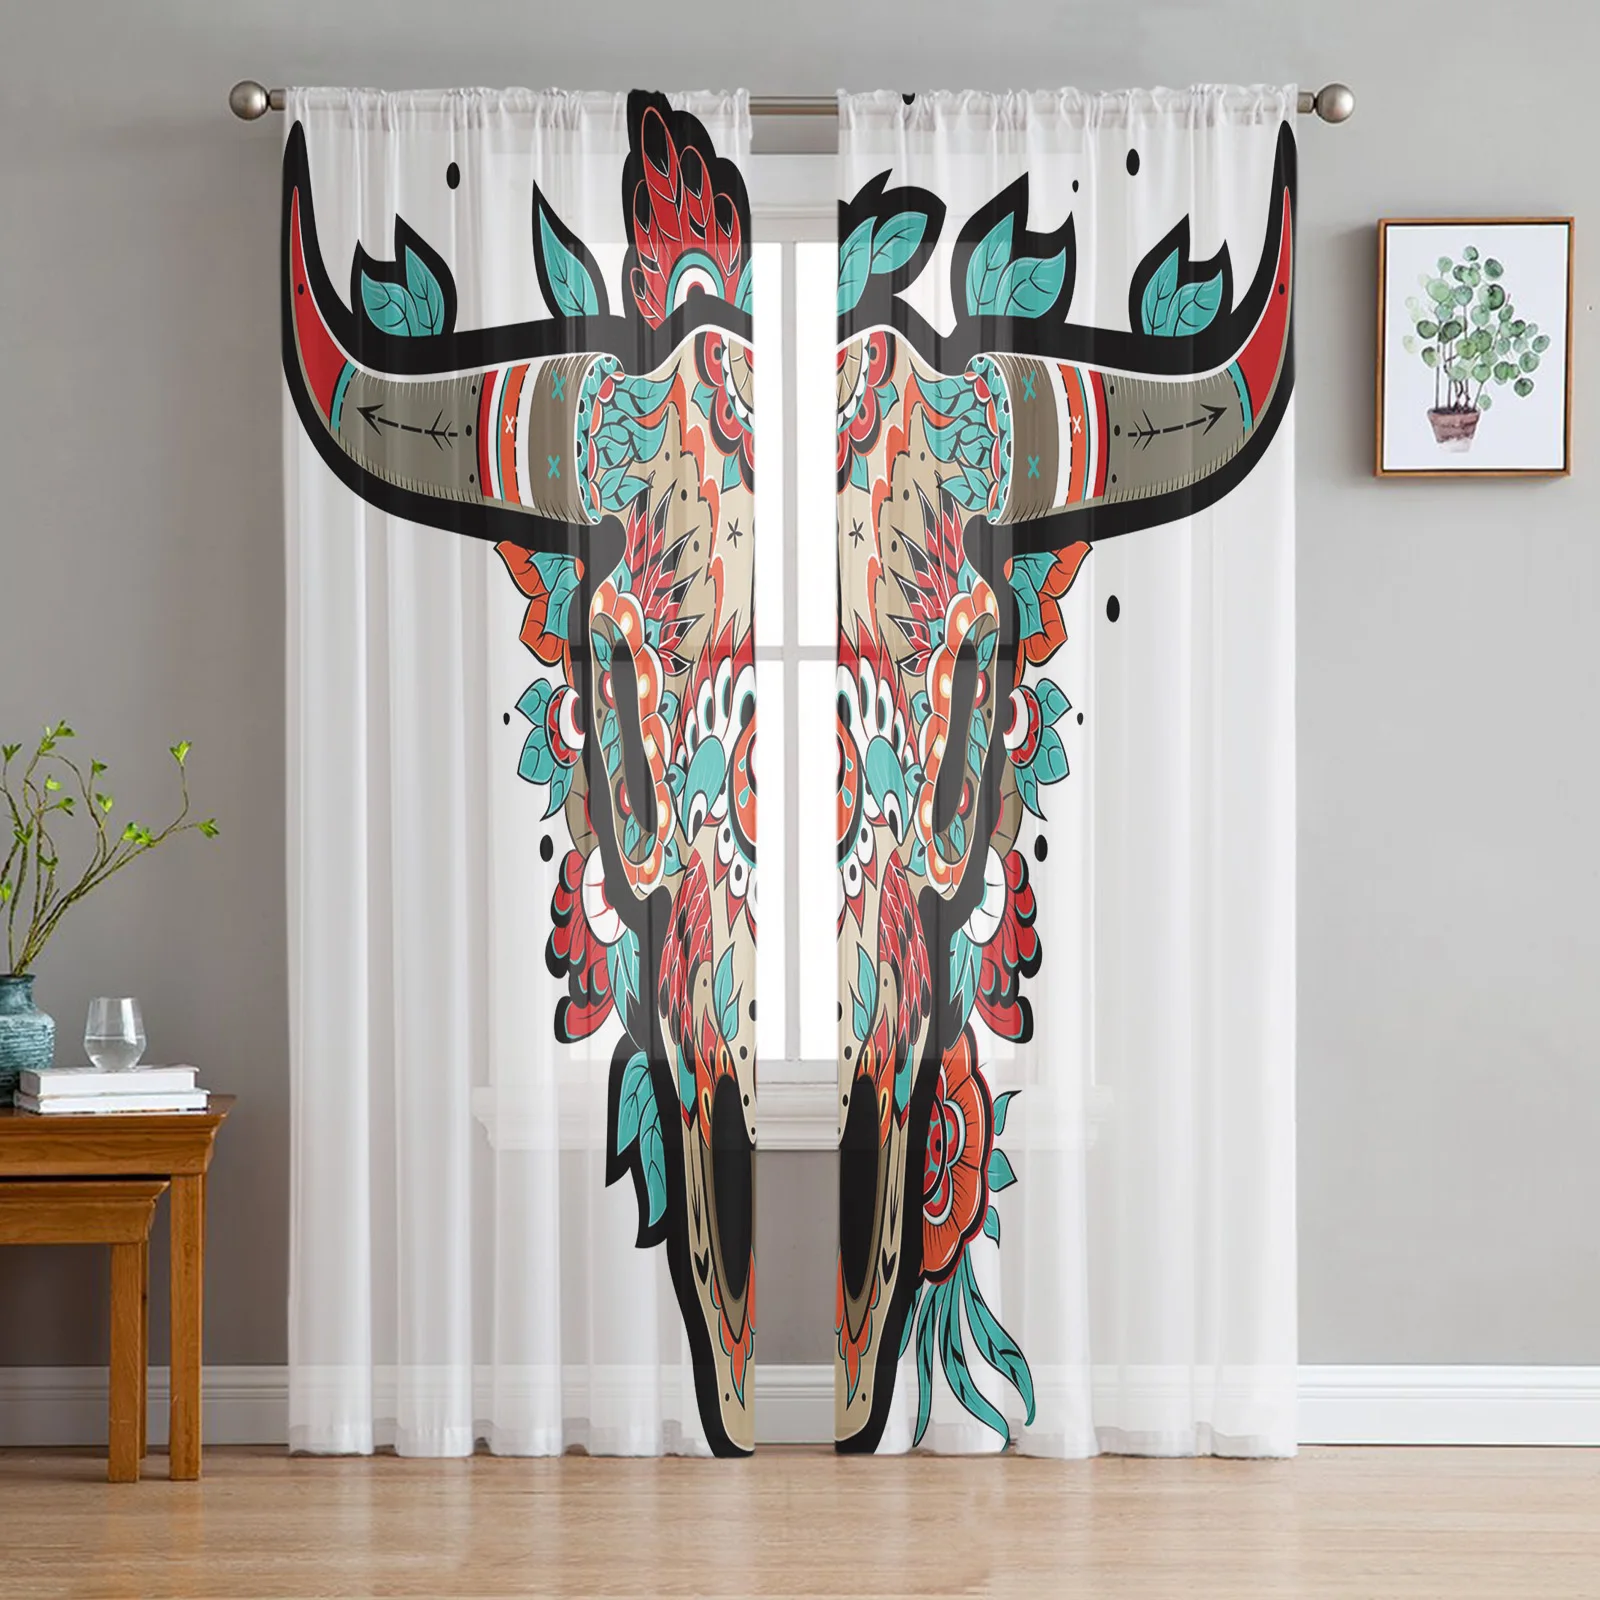 

Bull Skull Pattern Art Sheer Curtains for Living Room Voile Curtain Bedroom Bathroom Tulle Curtains Window Drapes